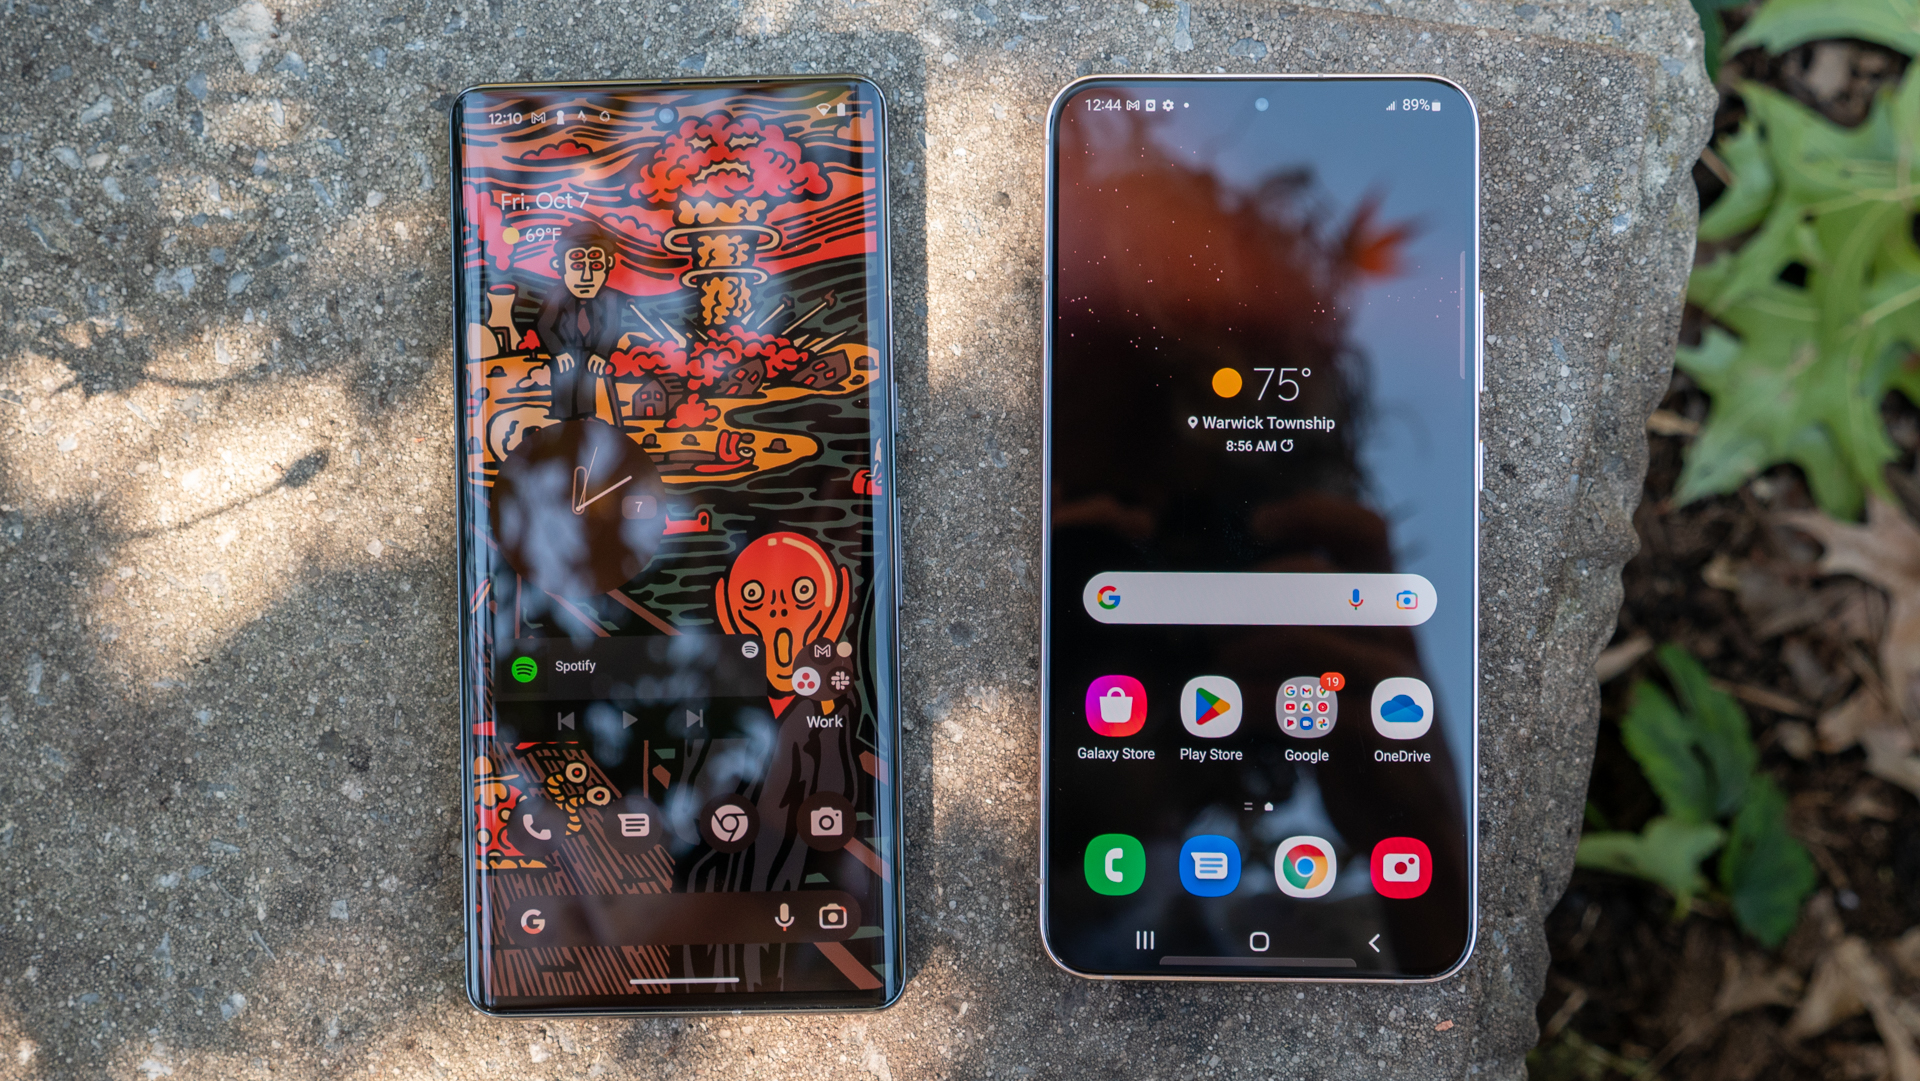 A Ggoogle Pixel 7Ppro next to a Samsung Galaxy S22 Plus shwing their home screens. Both rest on a concrete block outdoors.